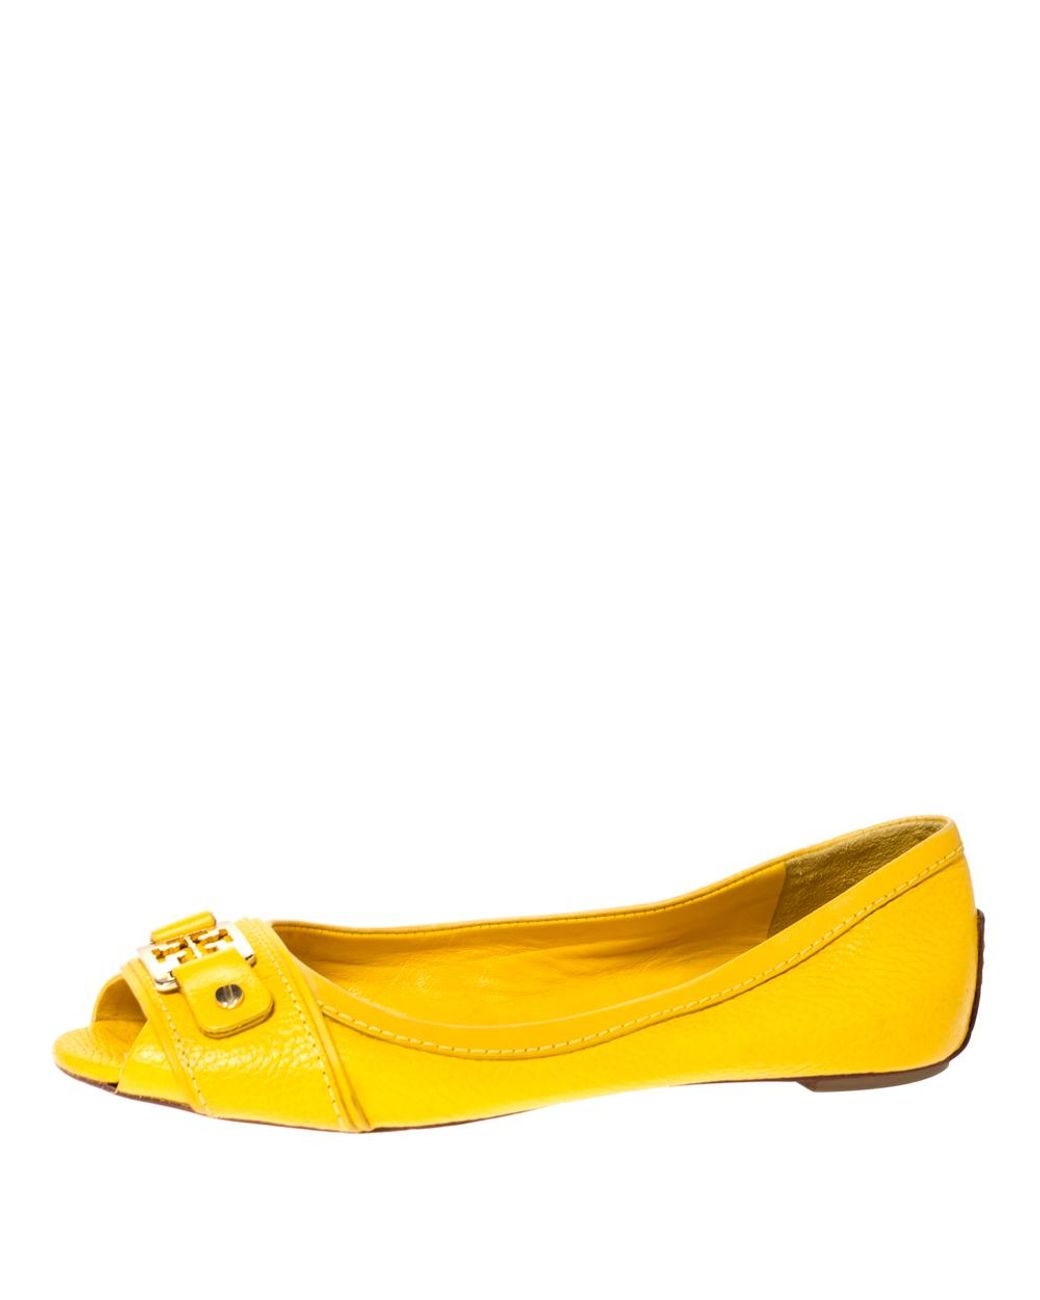 Tory Burch Mustard Leather Cline Peep Toe Ballet Flats Size 35.5 in ...